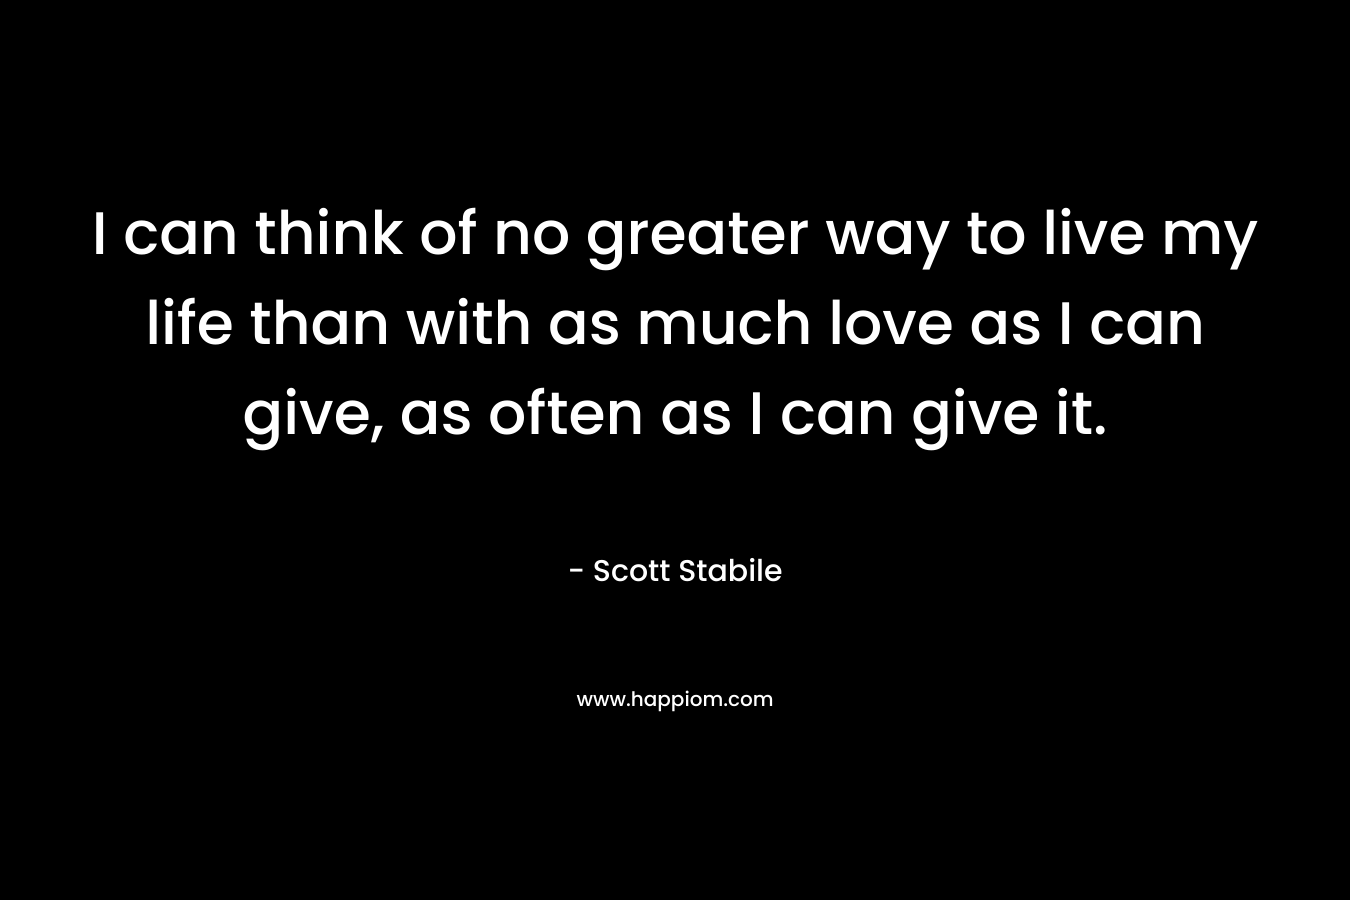 I can think of no greater way to live my life than with as much love as I can give, as often as I can give it.